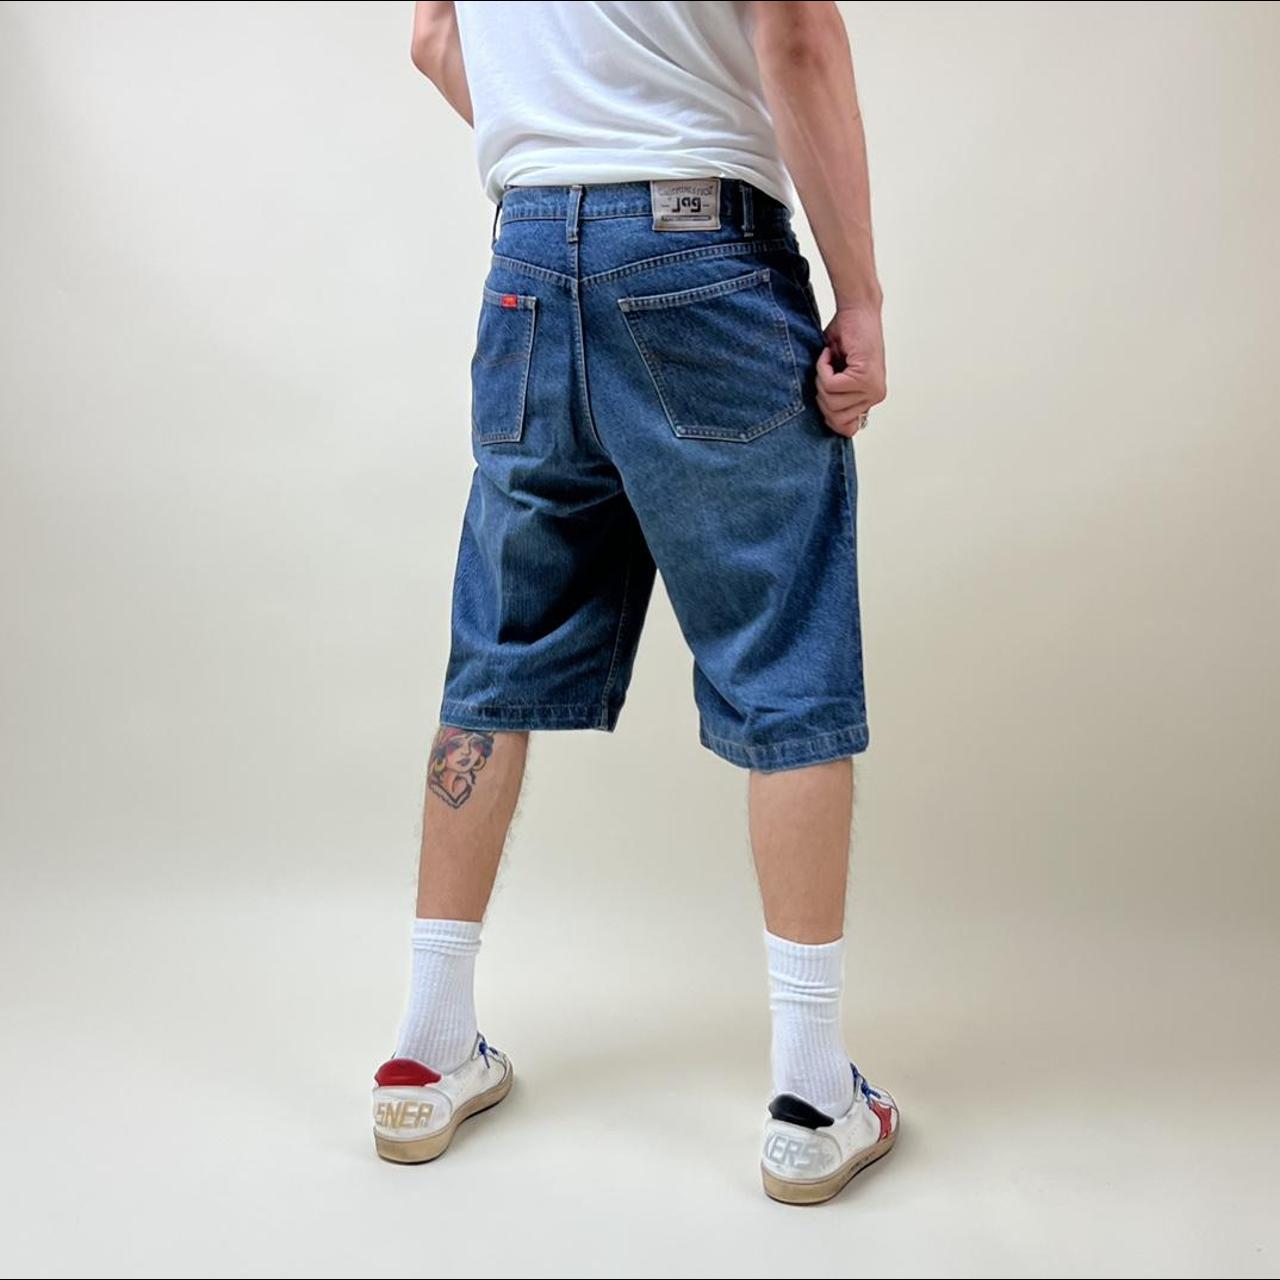 Trendsetting baggy jean shorts For Leisure And Fashion - Alibaba.com